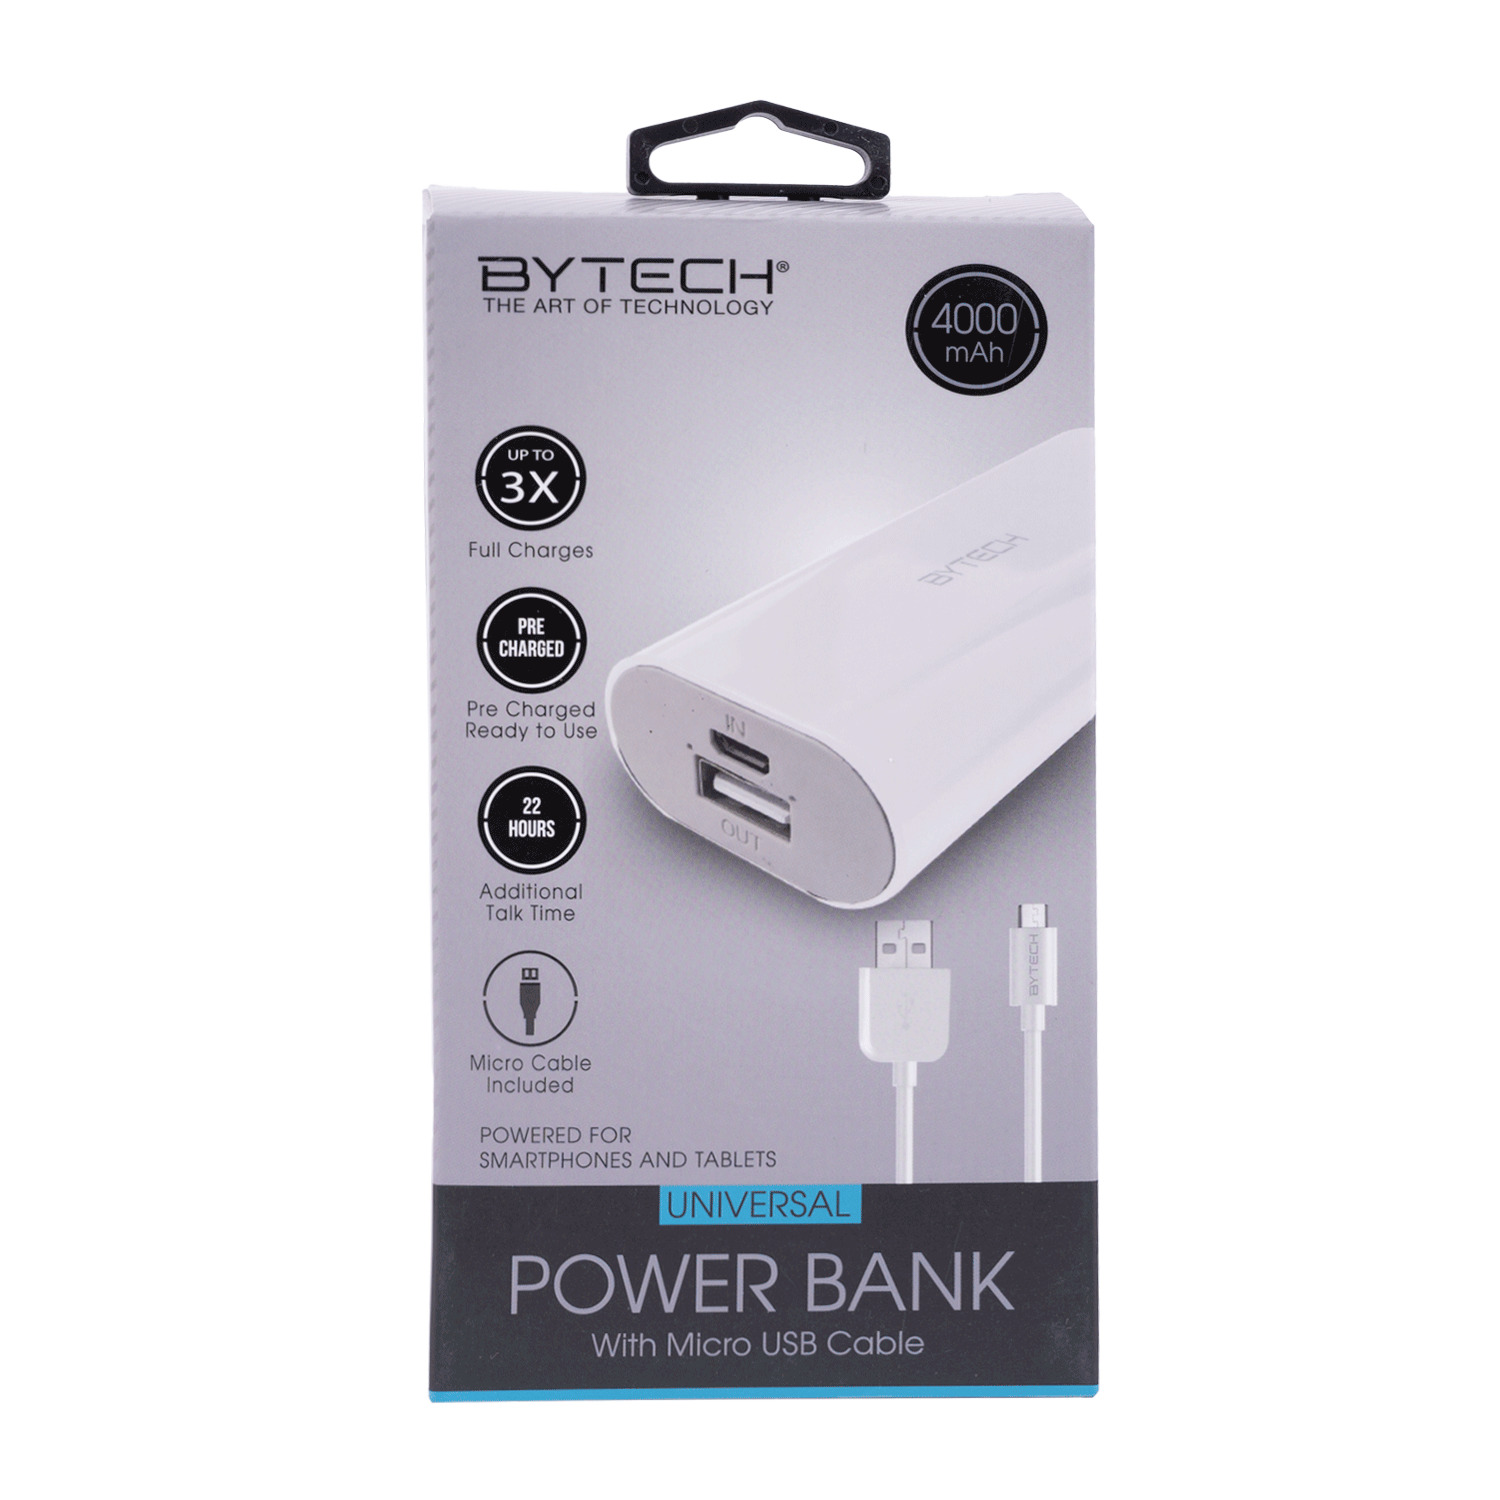 Bytech - Universal power bank with USB cable, 4000 mAh